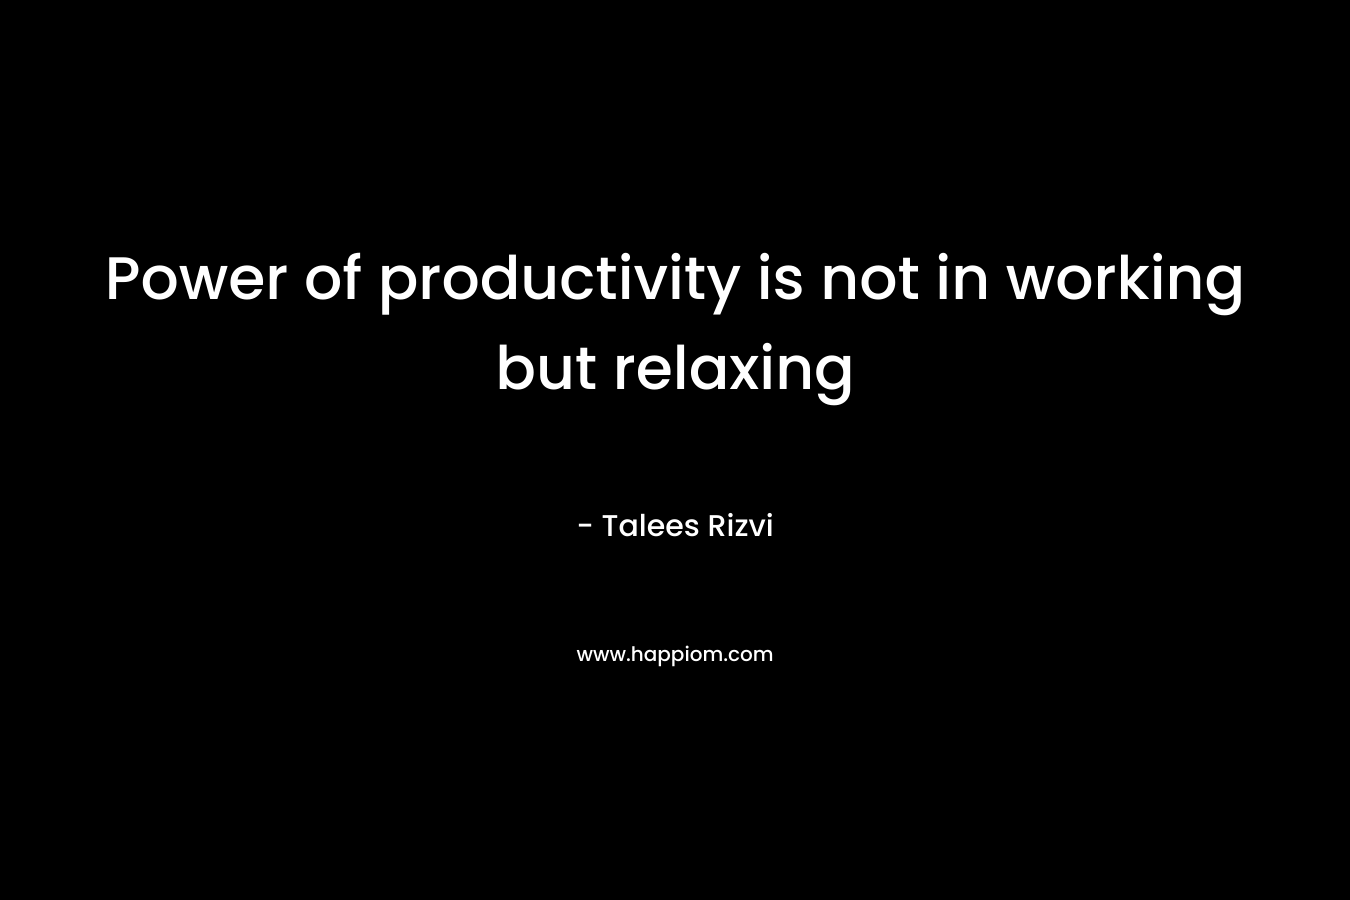 Power of productivity is not in working but relaxing